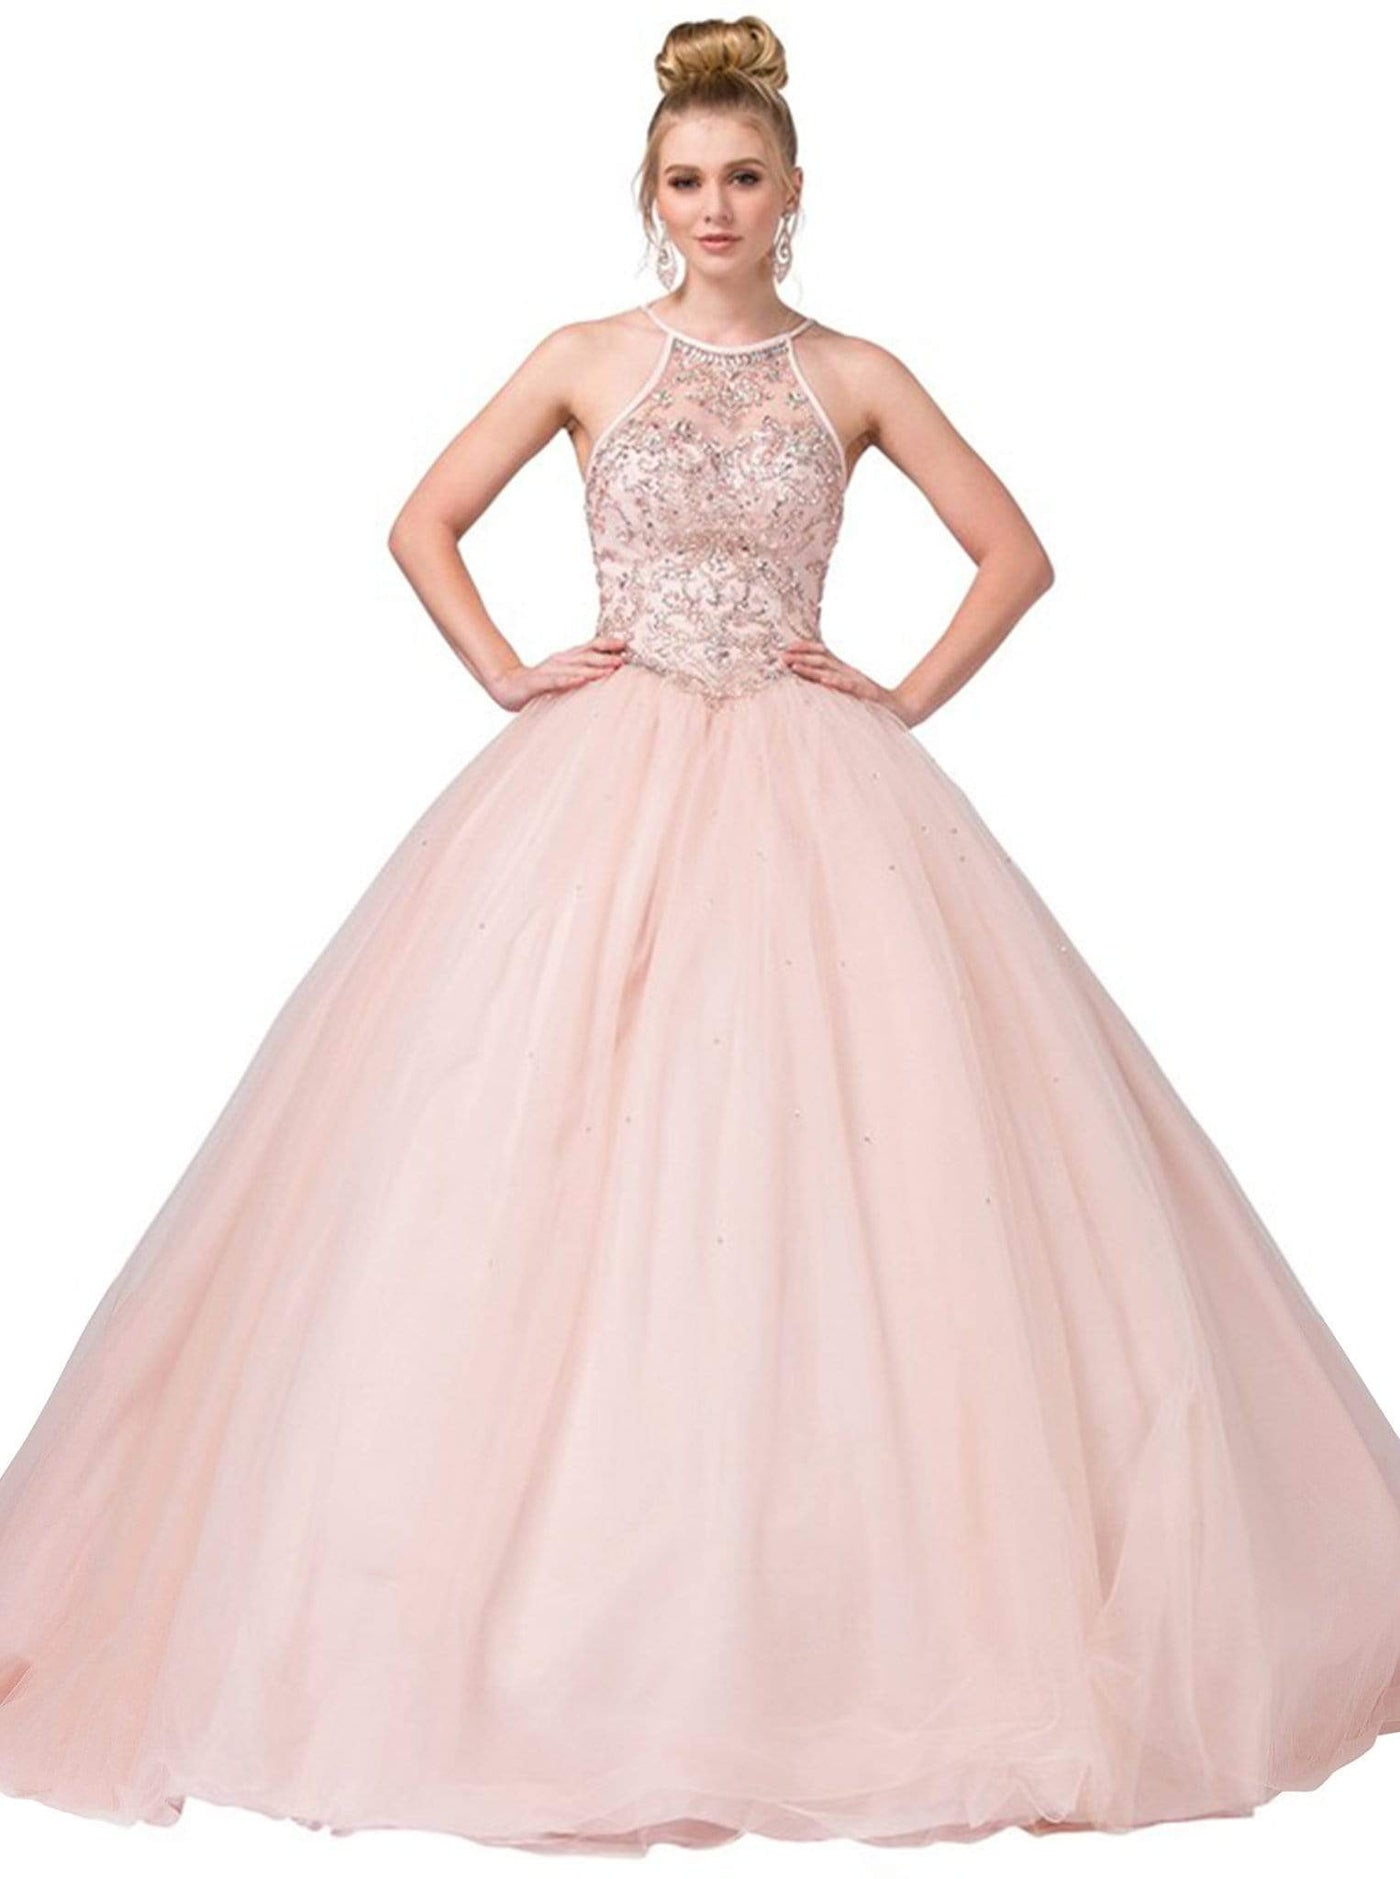 Dancing Queen - 1349 Embellished Halter Ballgown Special Occasion Dress XS / Blush